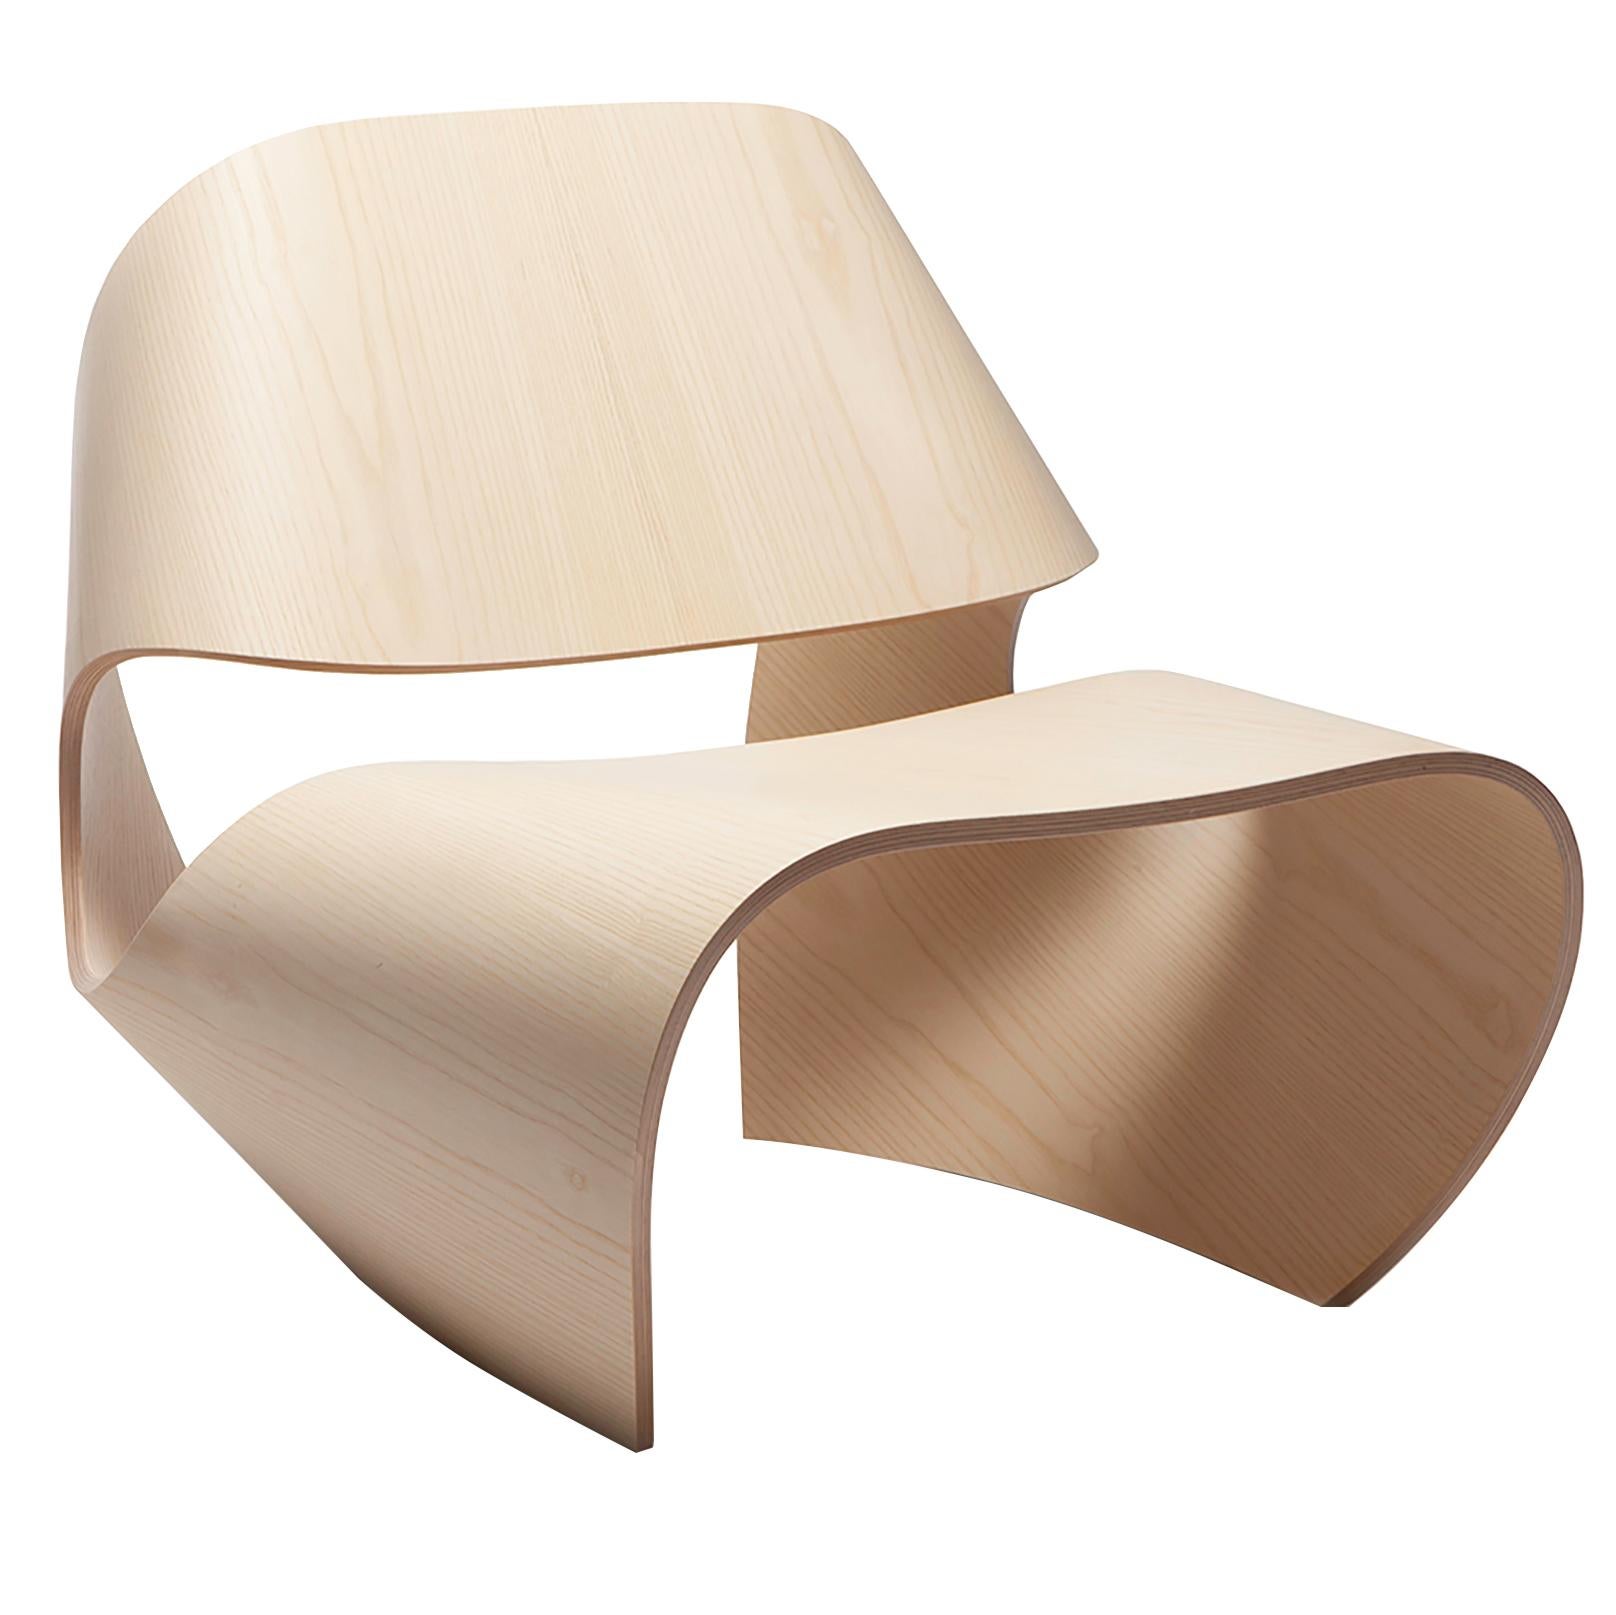 Cowrie, Ash Veneered Bent Plywood Lounge Chair by Made in Ratio For Sale